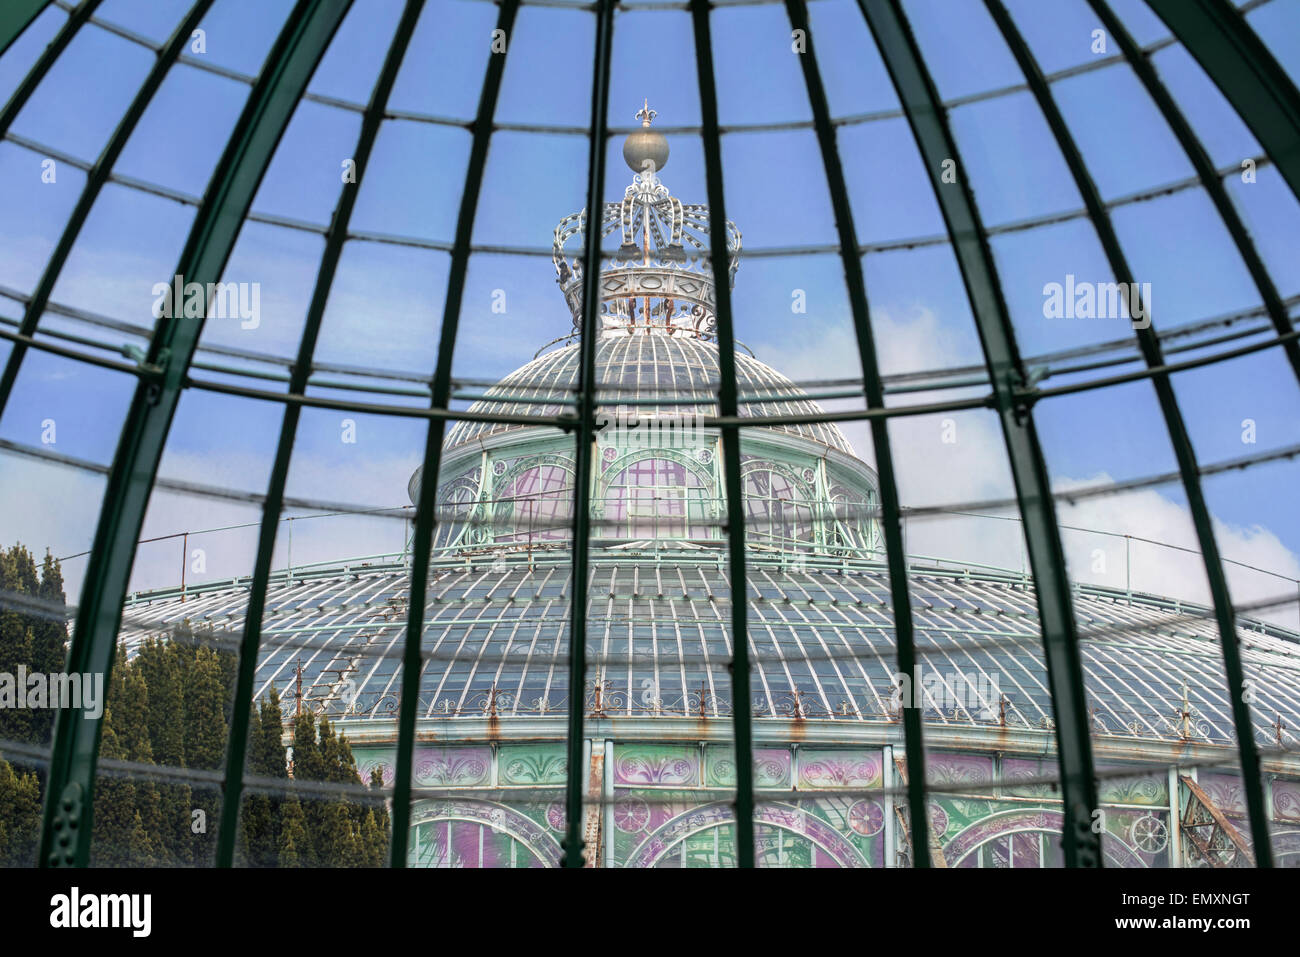 Dome of the Jardin d'hiver / Winter Garden in Art Nouveau style by Alphonse Balat, at the Royal Greenhouses of Laeken Belgium Stock Photo